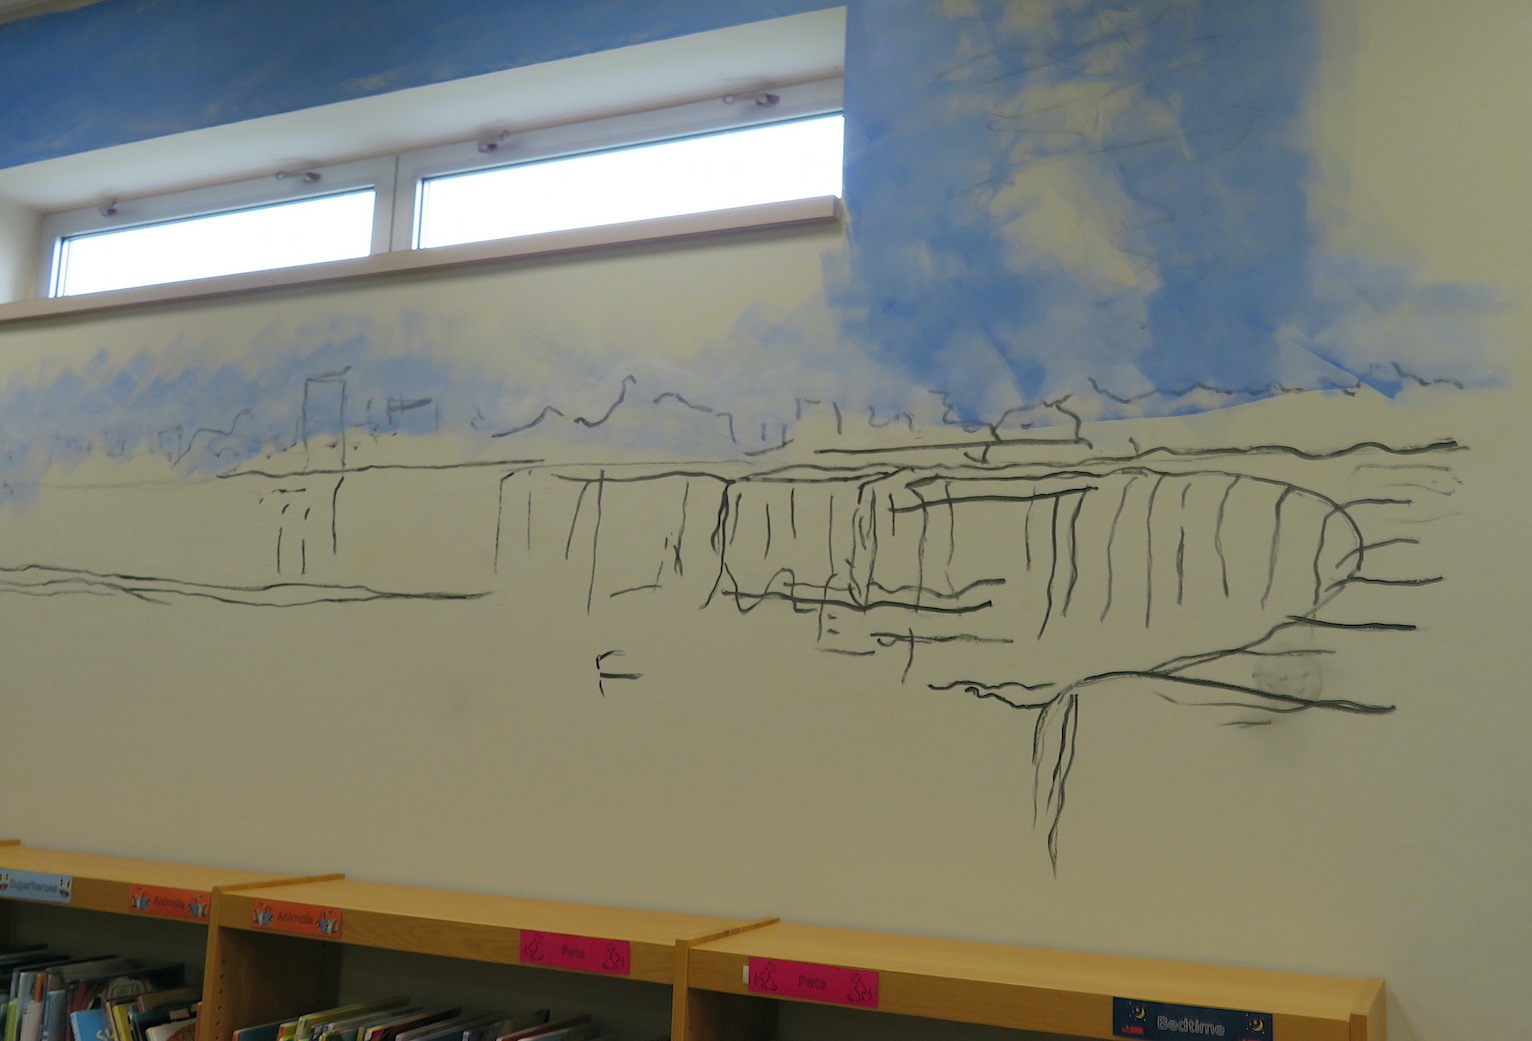 A rough sketch of Niagara Falls is painted on the wall.